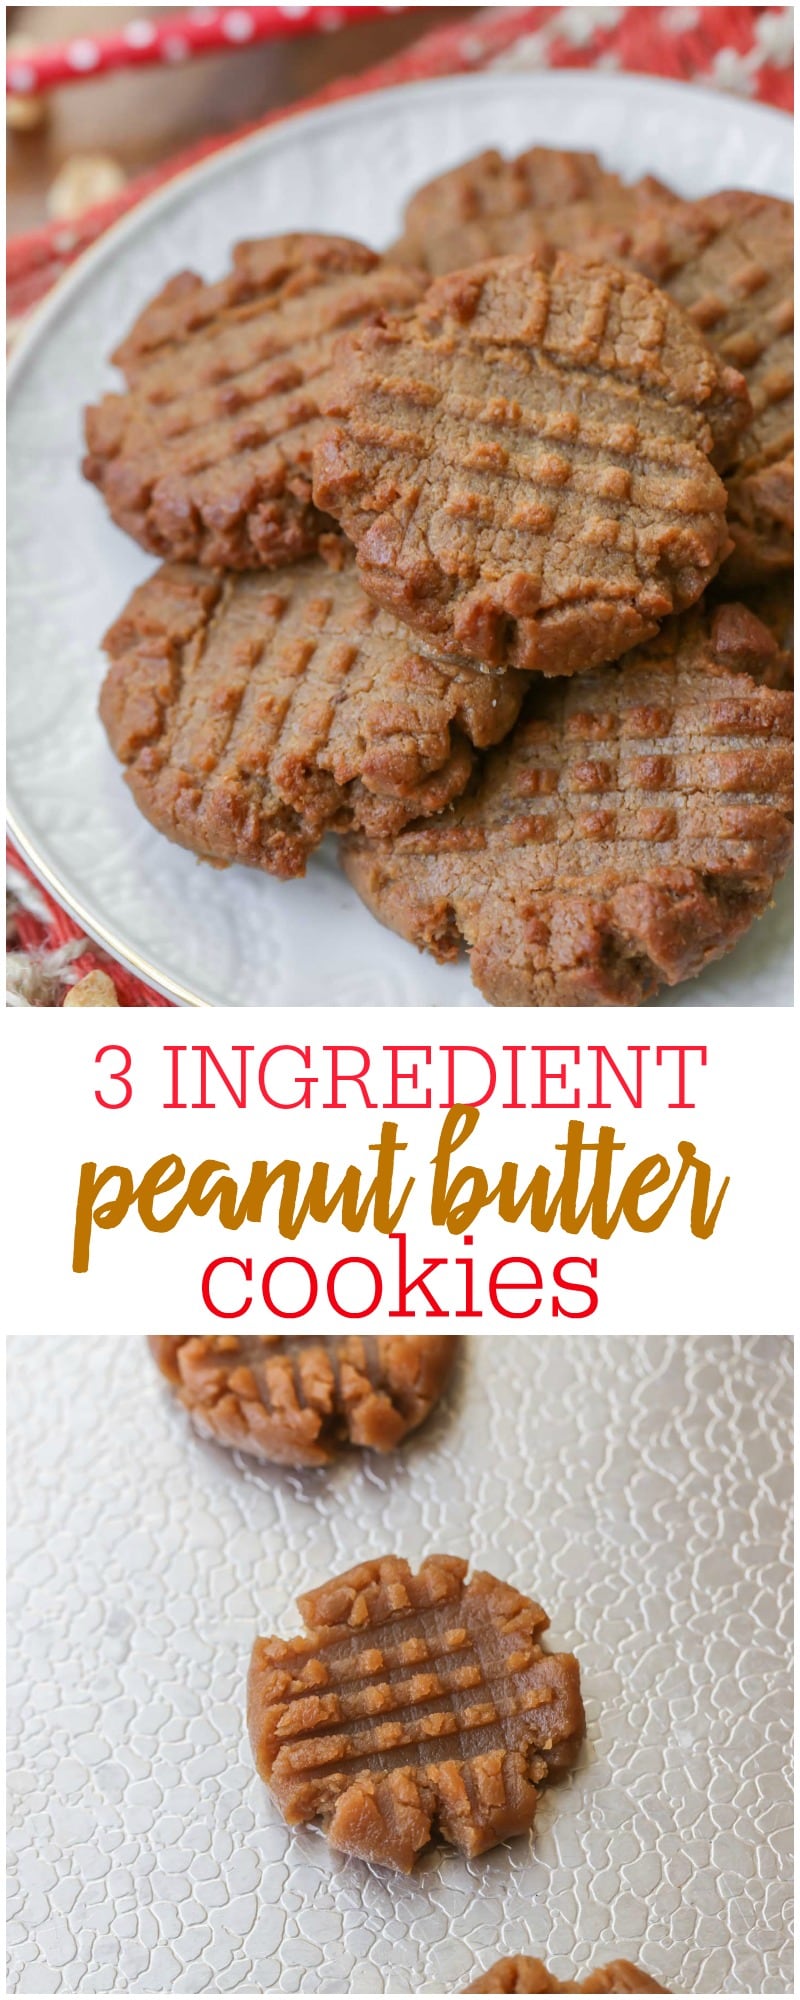 Quick, easy and delicious 3 Ingredient Peanut Butter Cookies. They take just minutes to throw together and are so easy the kids can make them!